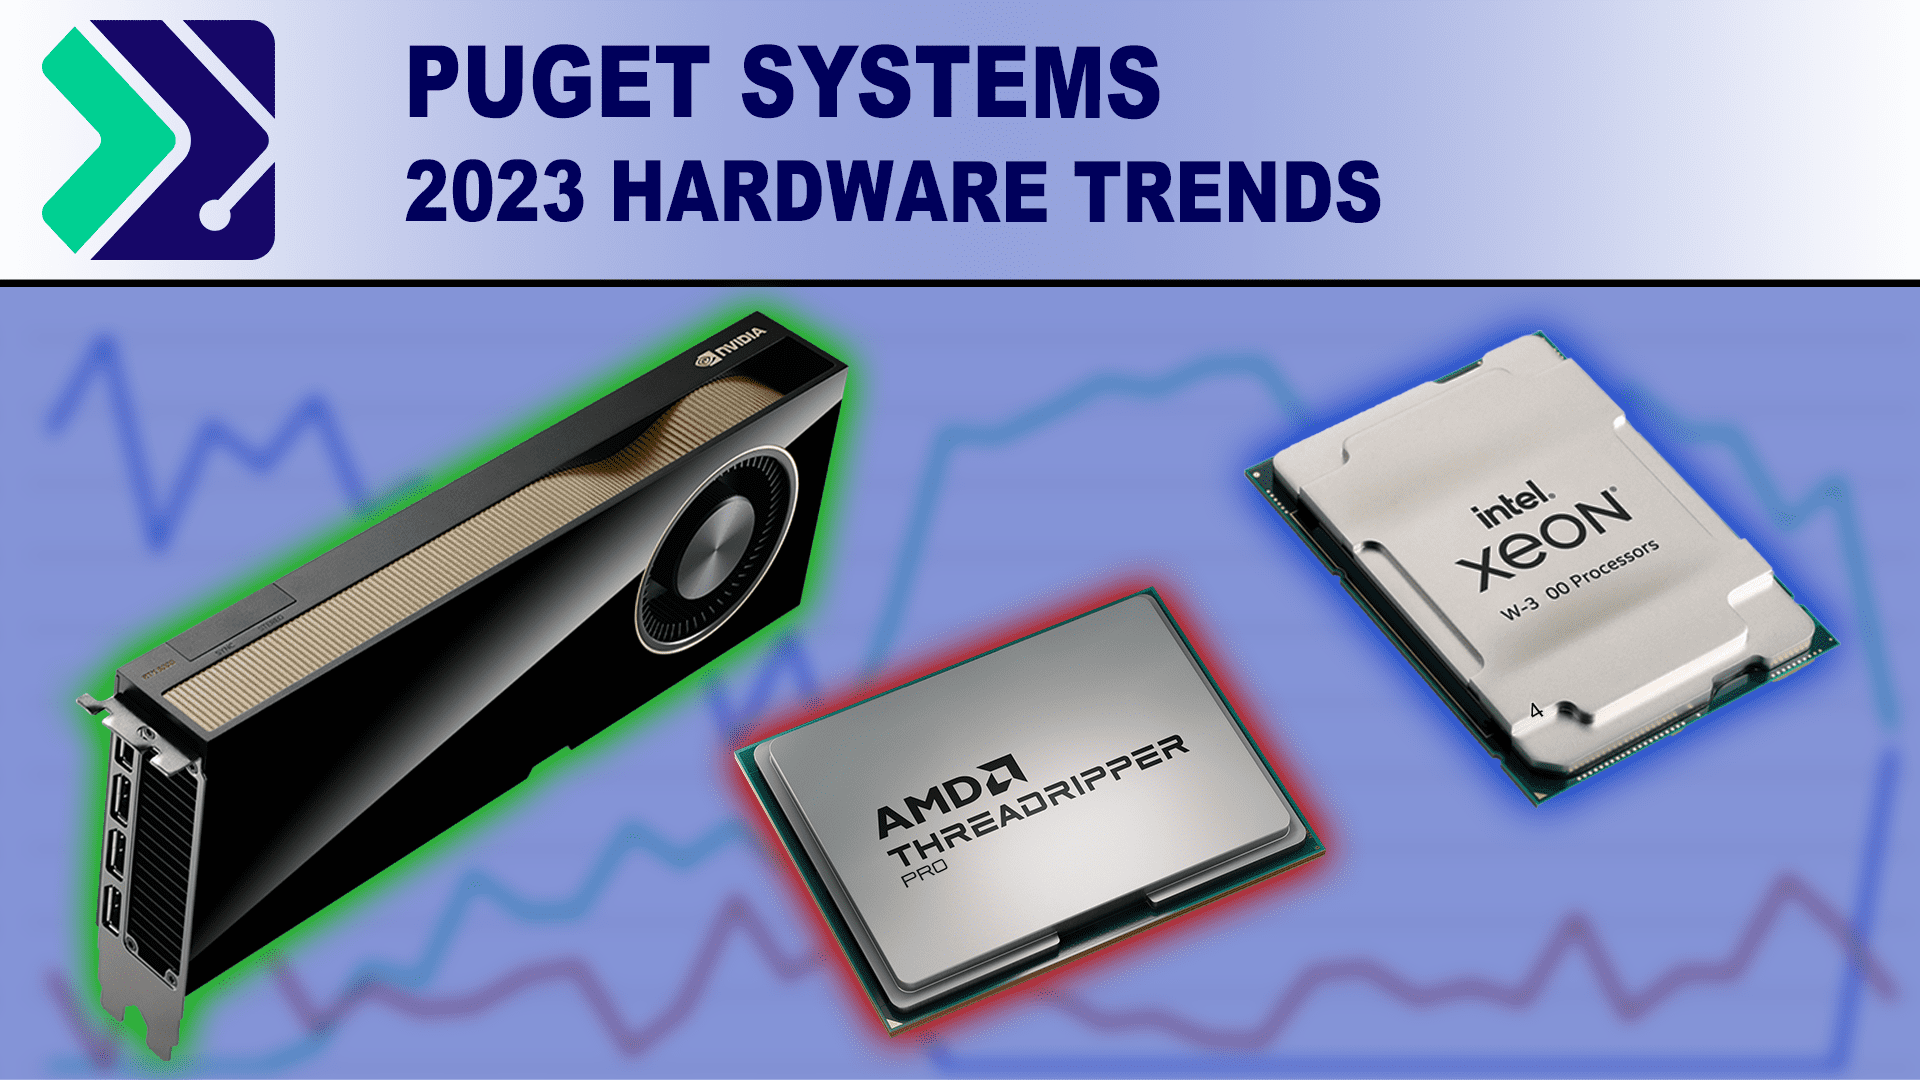 Puget Systems hardware trends of 2023